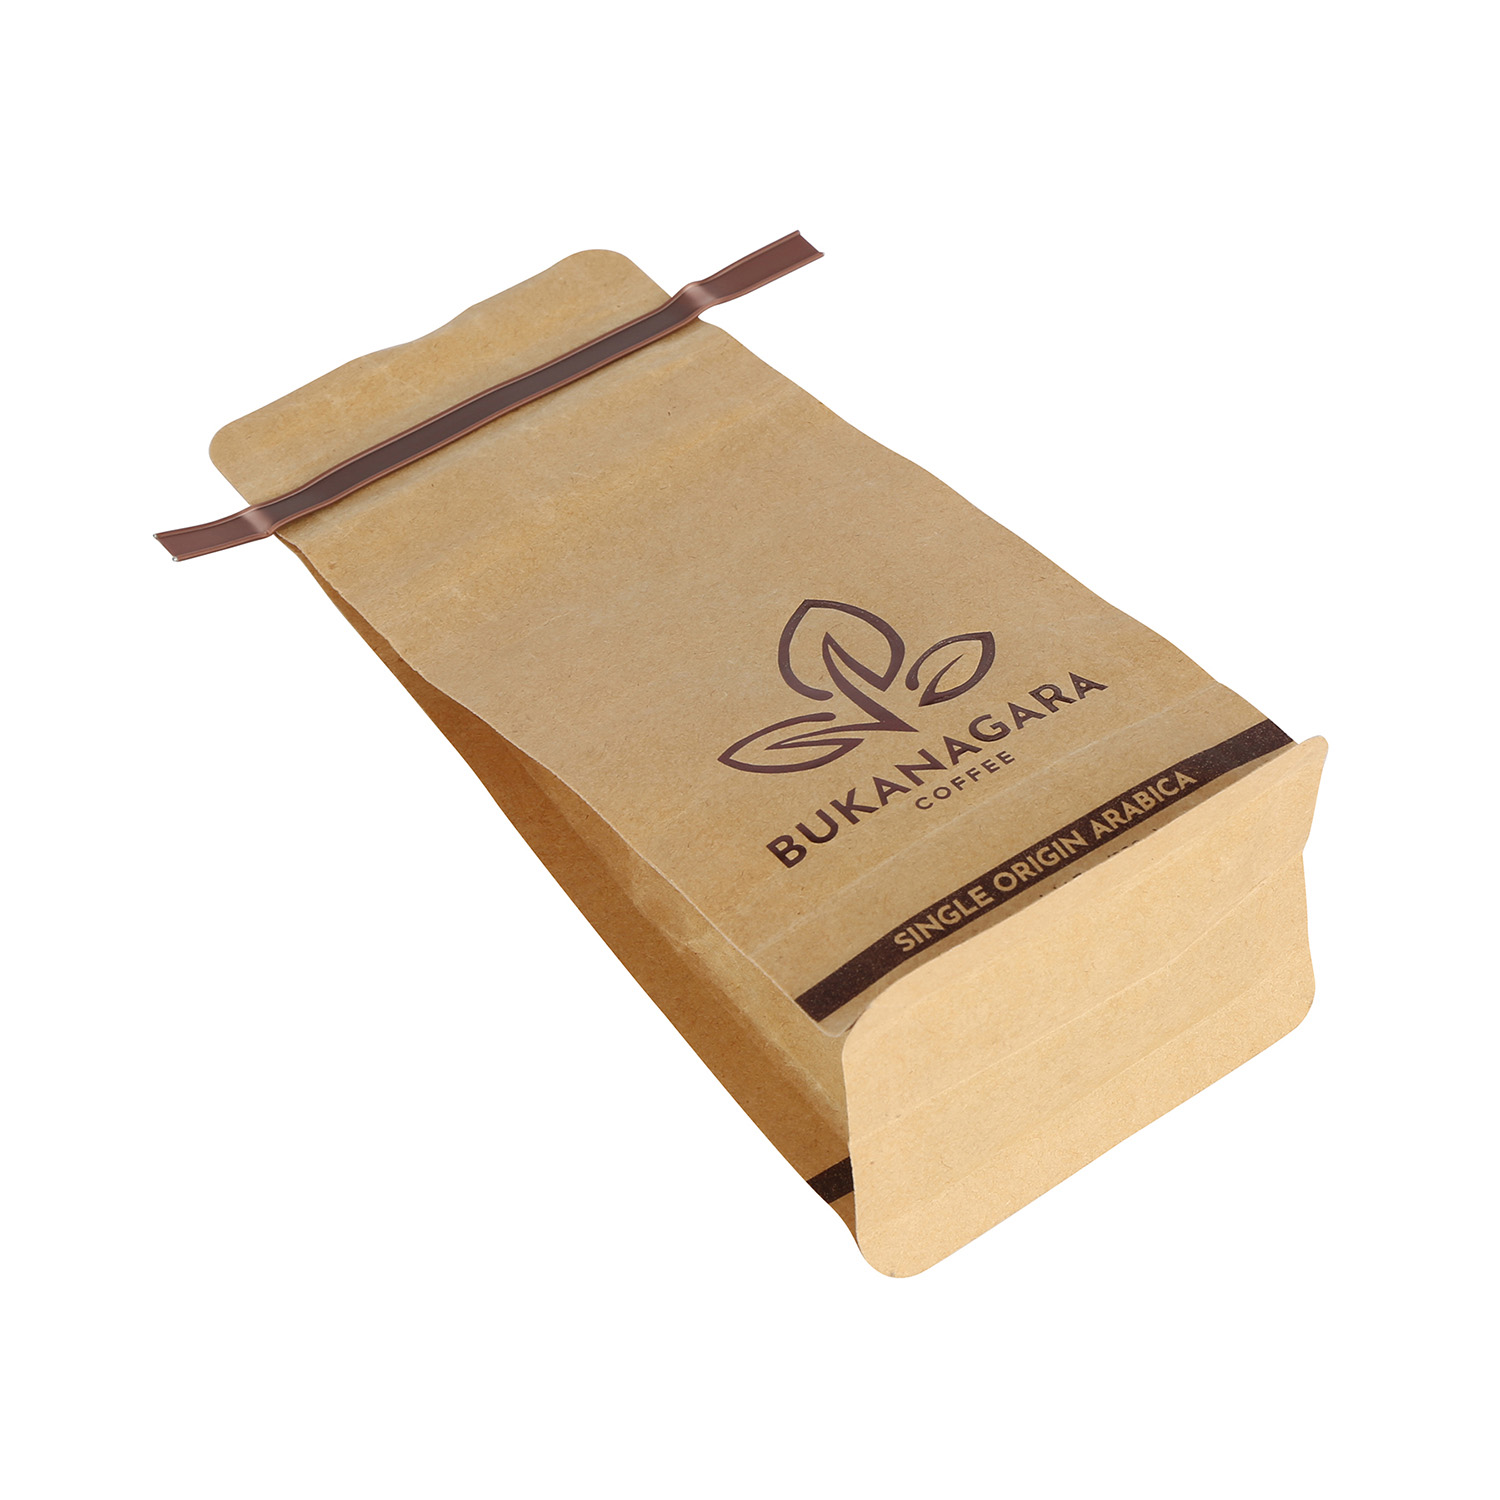 China Suppliers Home Compostable 2 Oz Kraft Paper Bags for Coffee